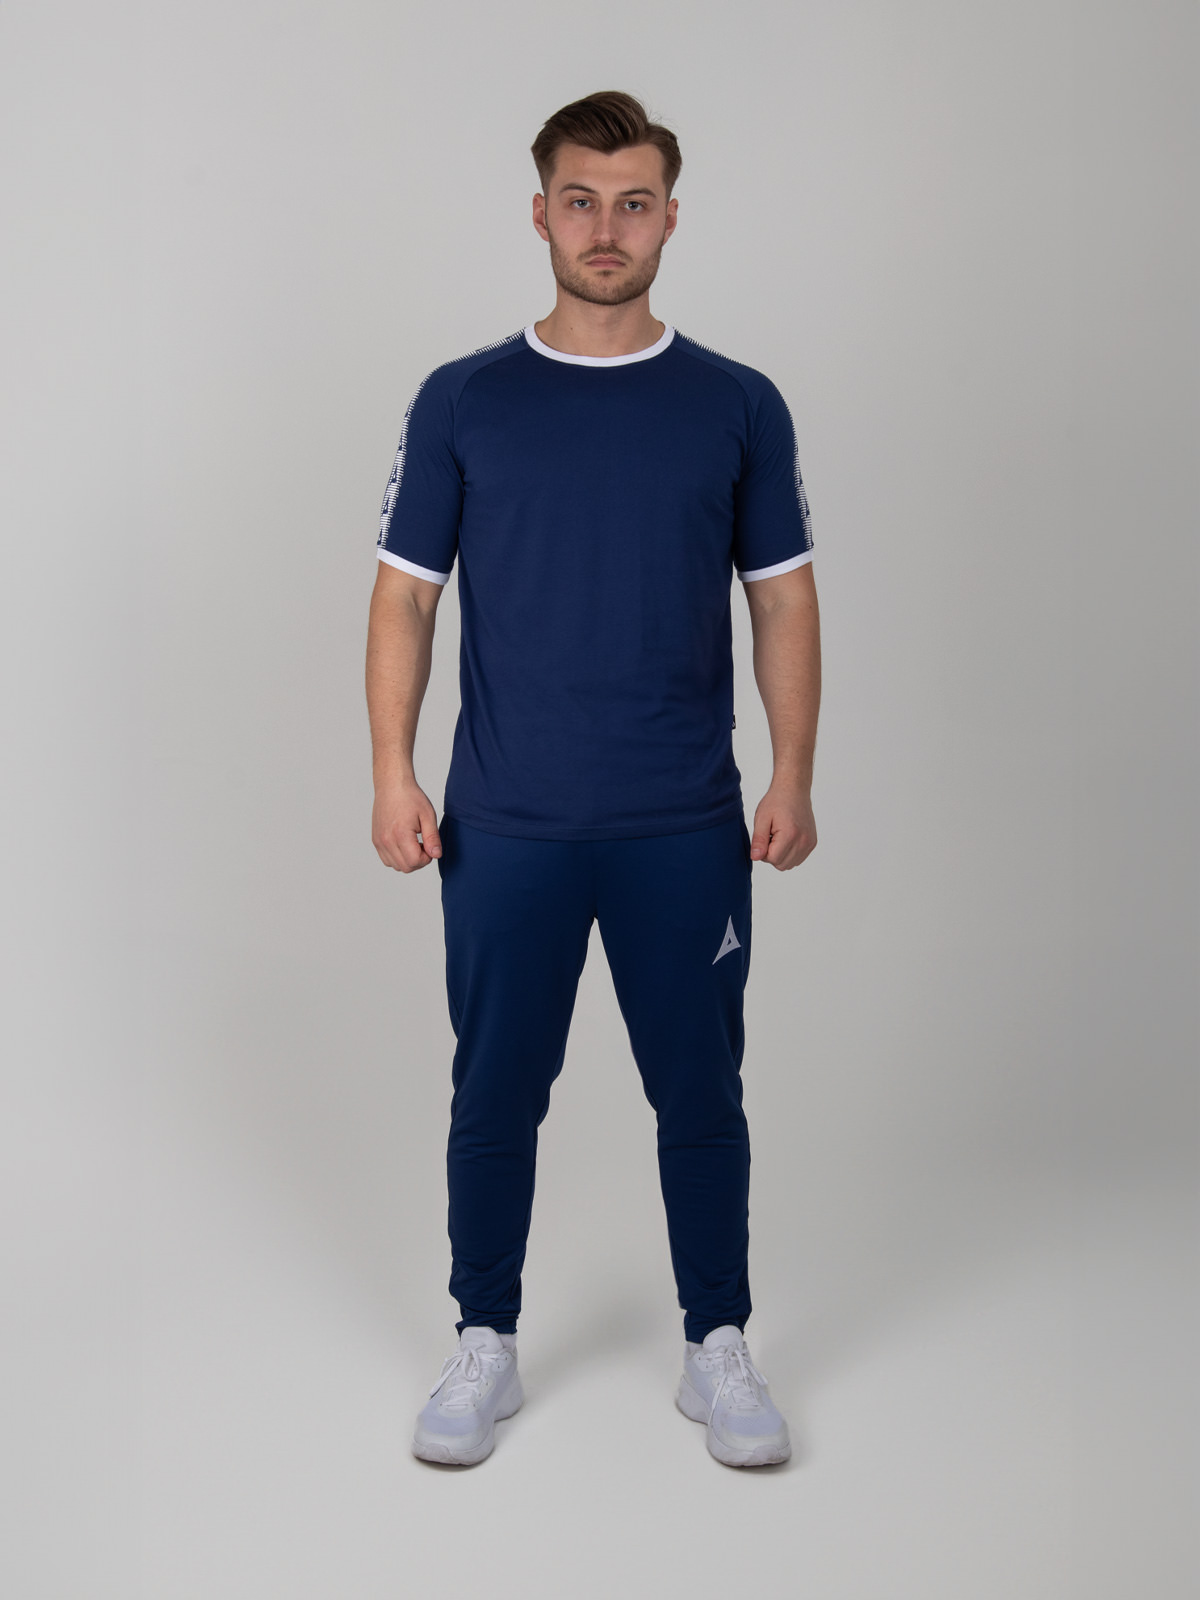 a navy cotton t-shirt with white trim is matched with navy jogging bottoms